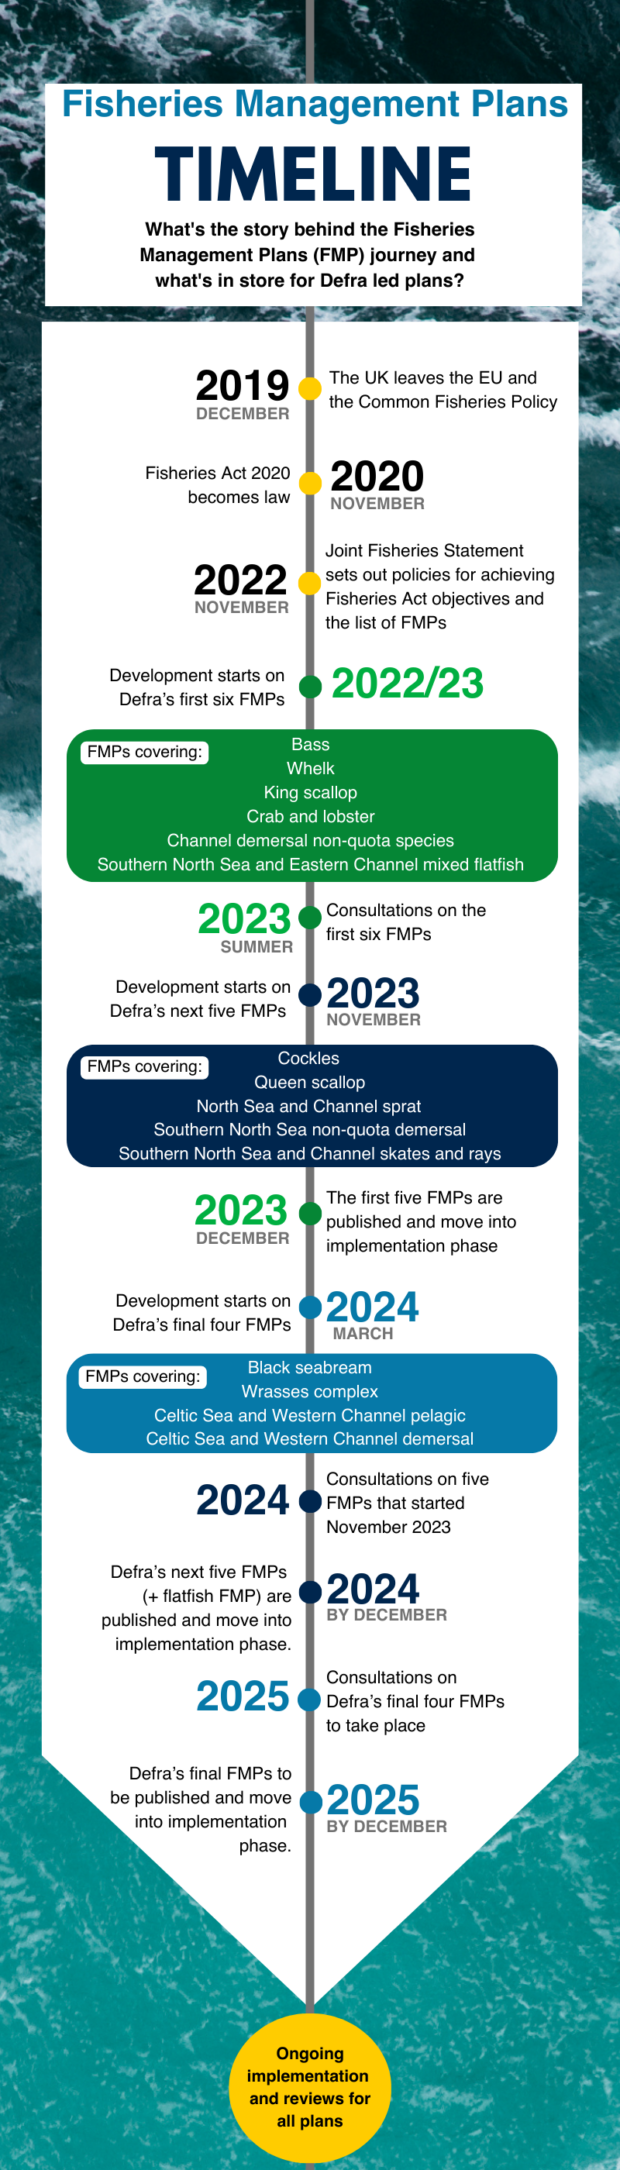 Infographic showing the timeline of development and implementation of Defra's FMPs